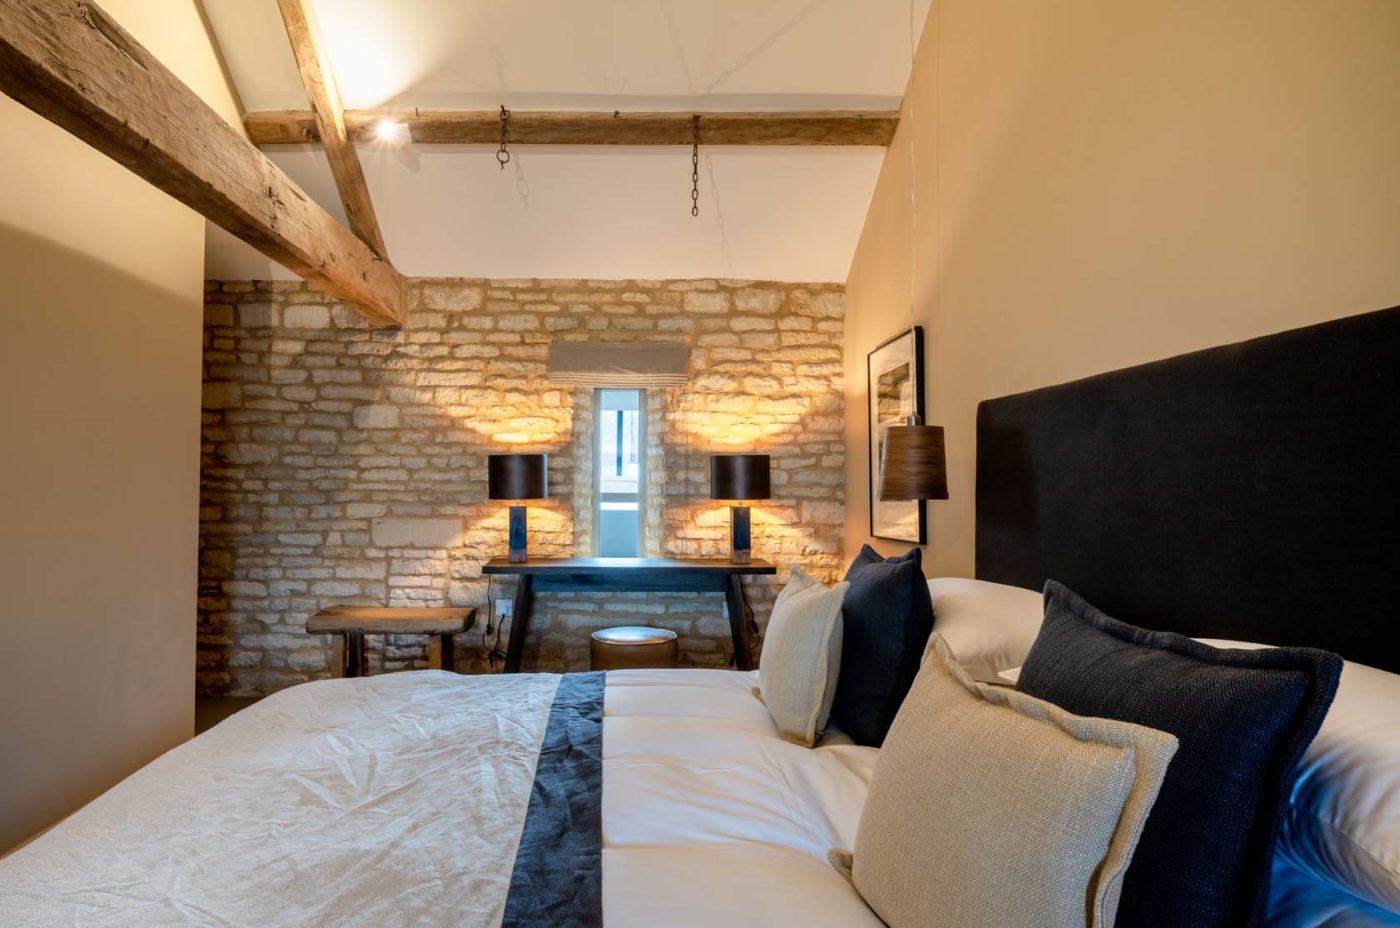 Bedroom with exposed stone walls and exposed wooden beams